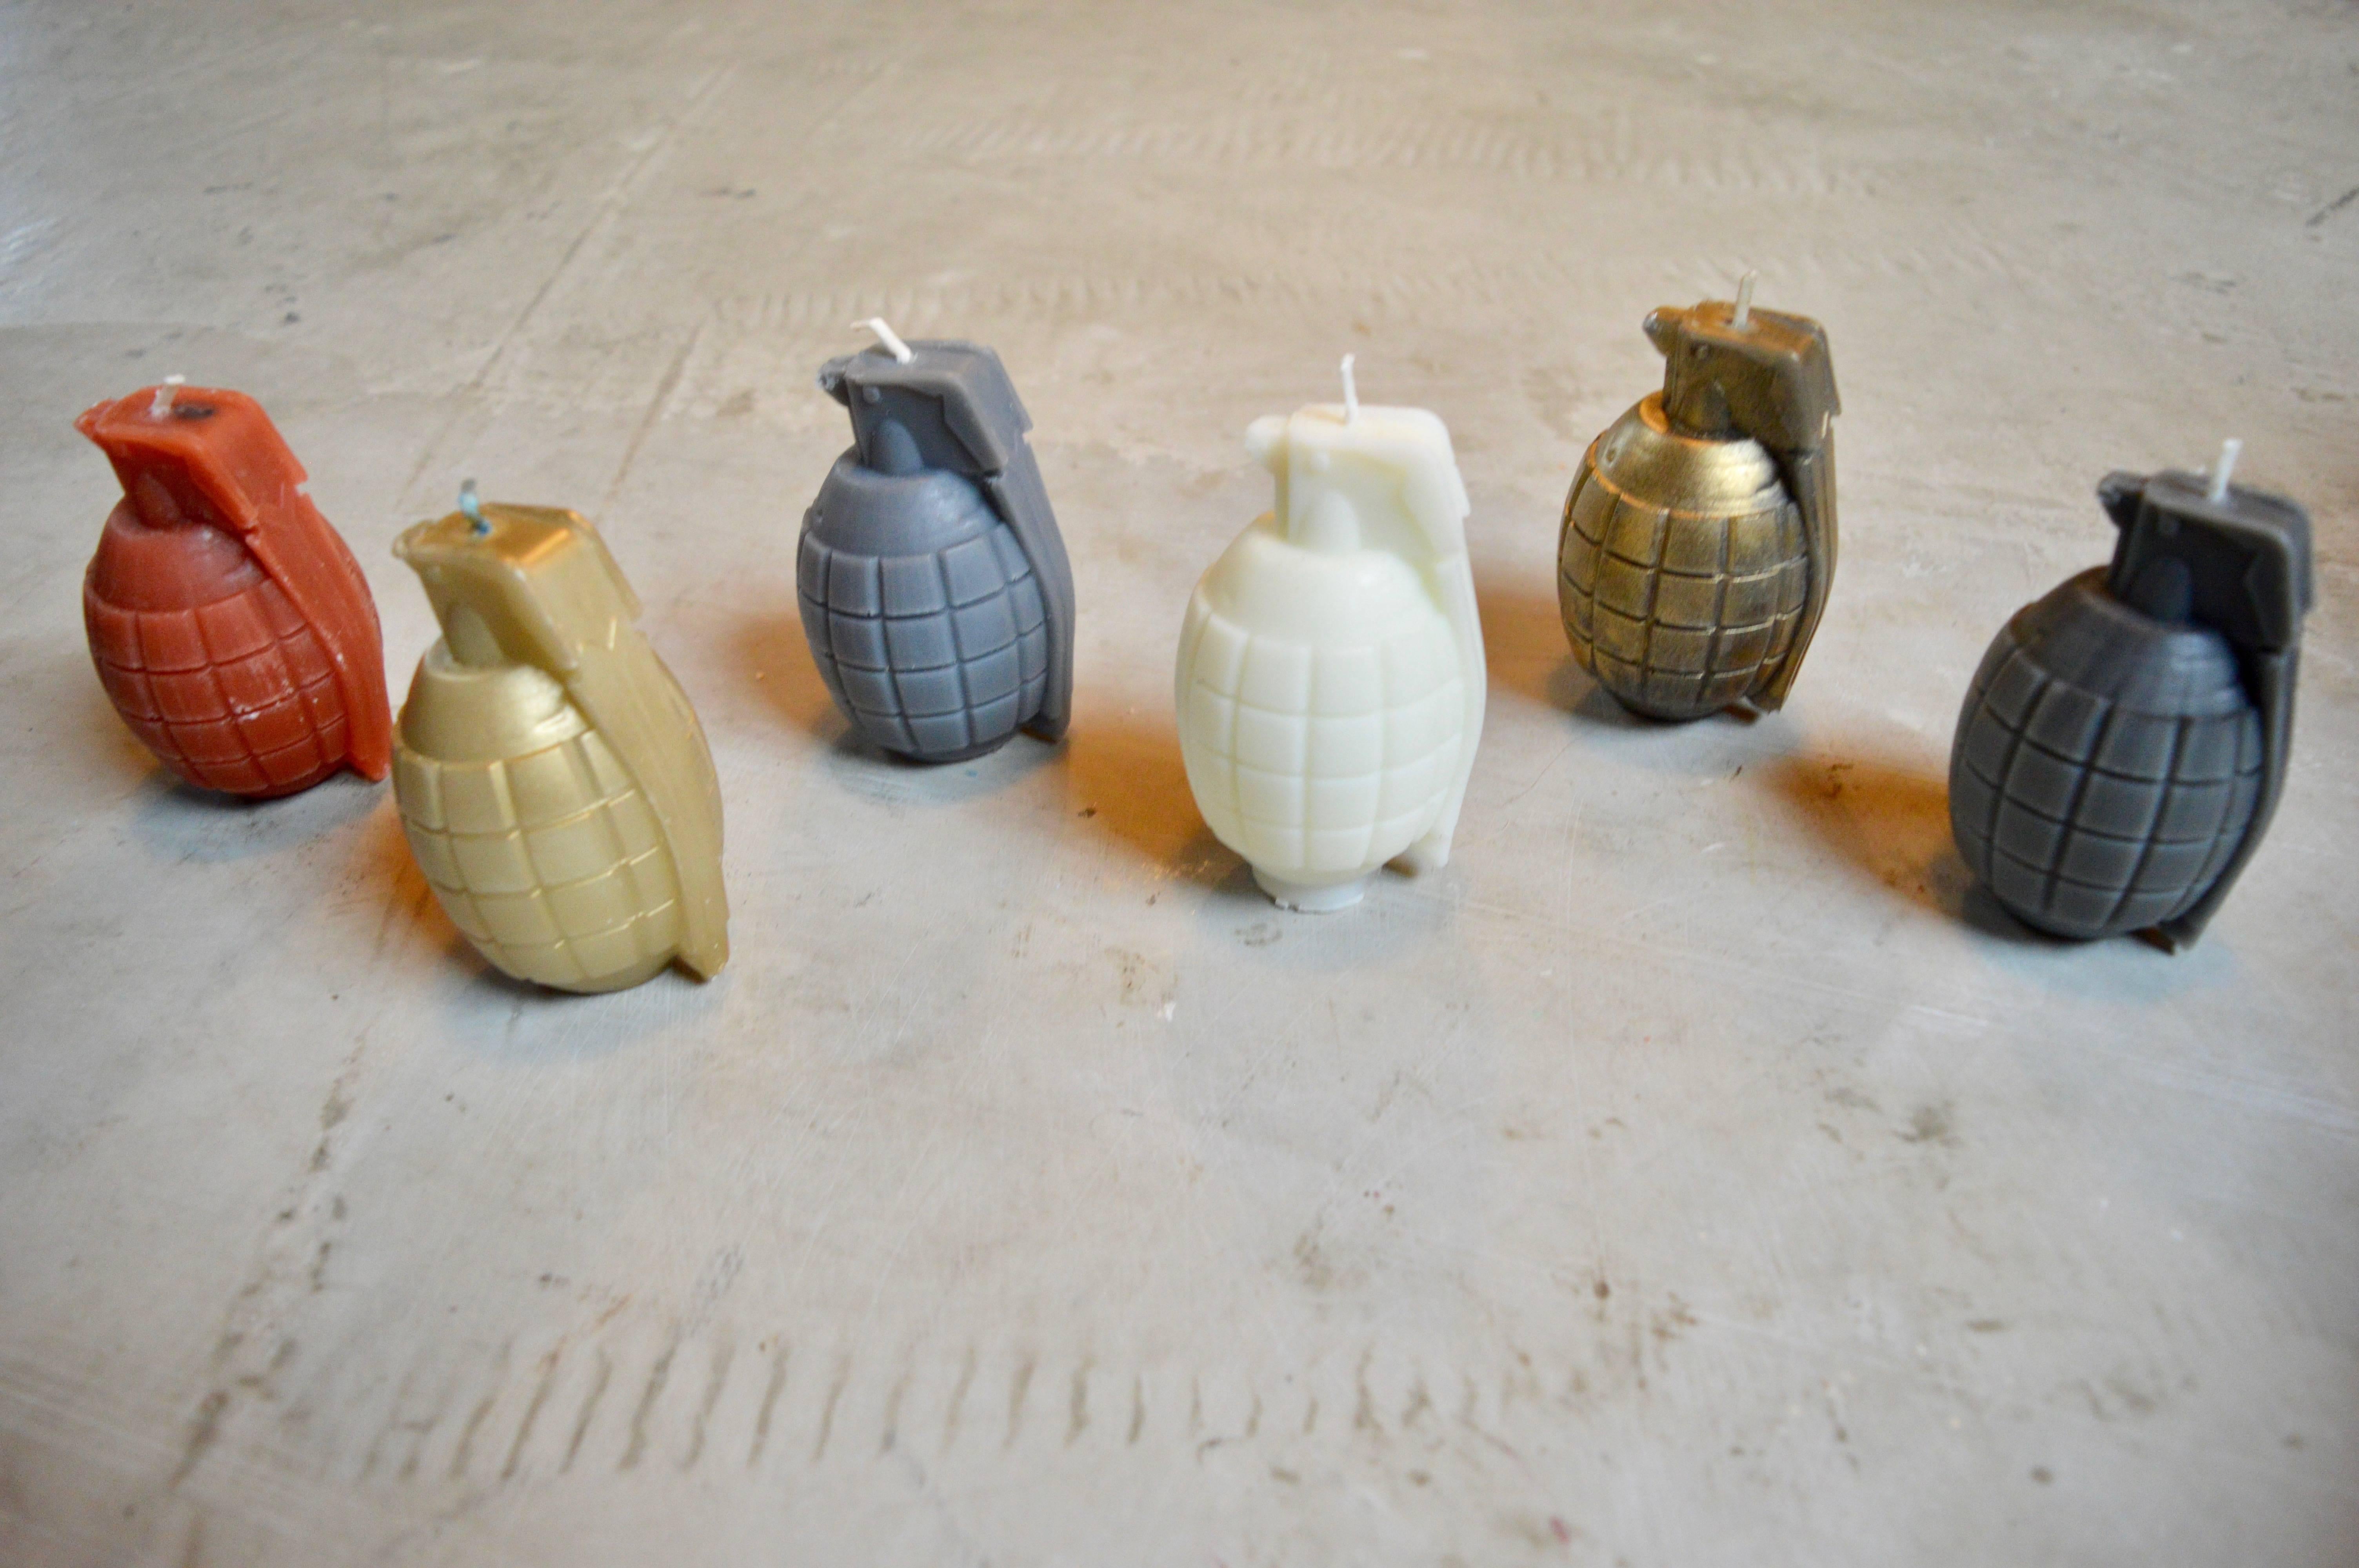 Whimsical handmade candles in the shape of a grenade. Los Angeles based, Japanese artist and sculptor. He hand carves the mold and then makes the candles from the mold. Great tabletop object.